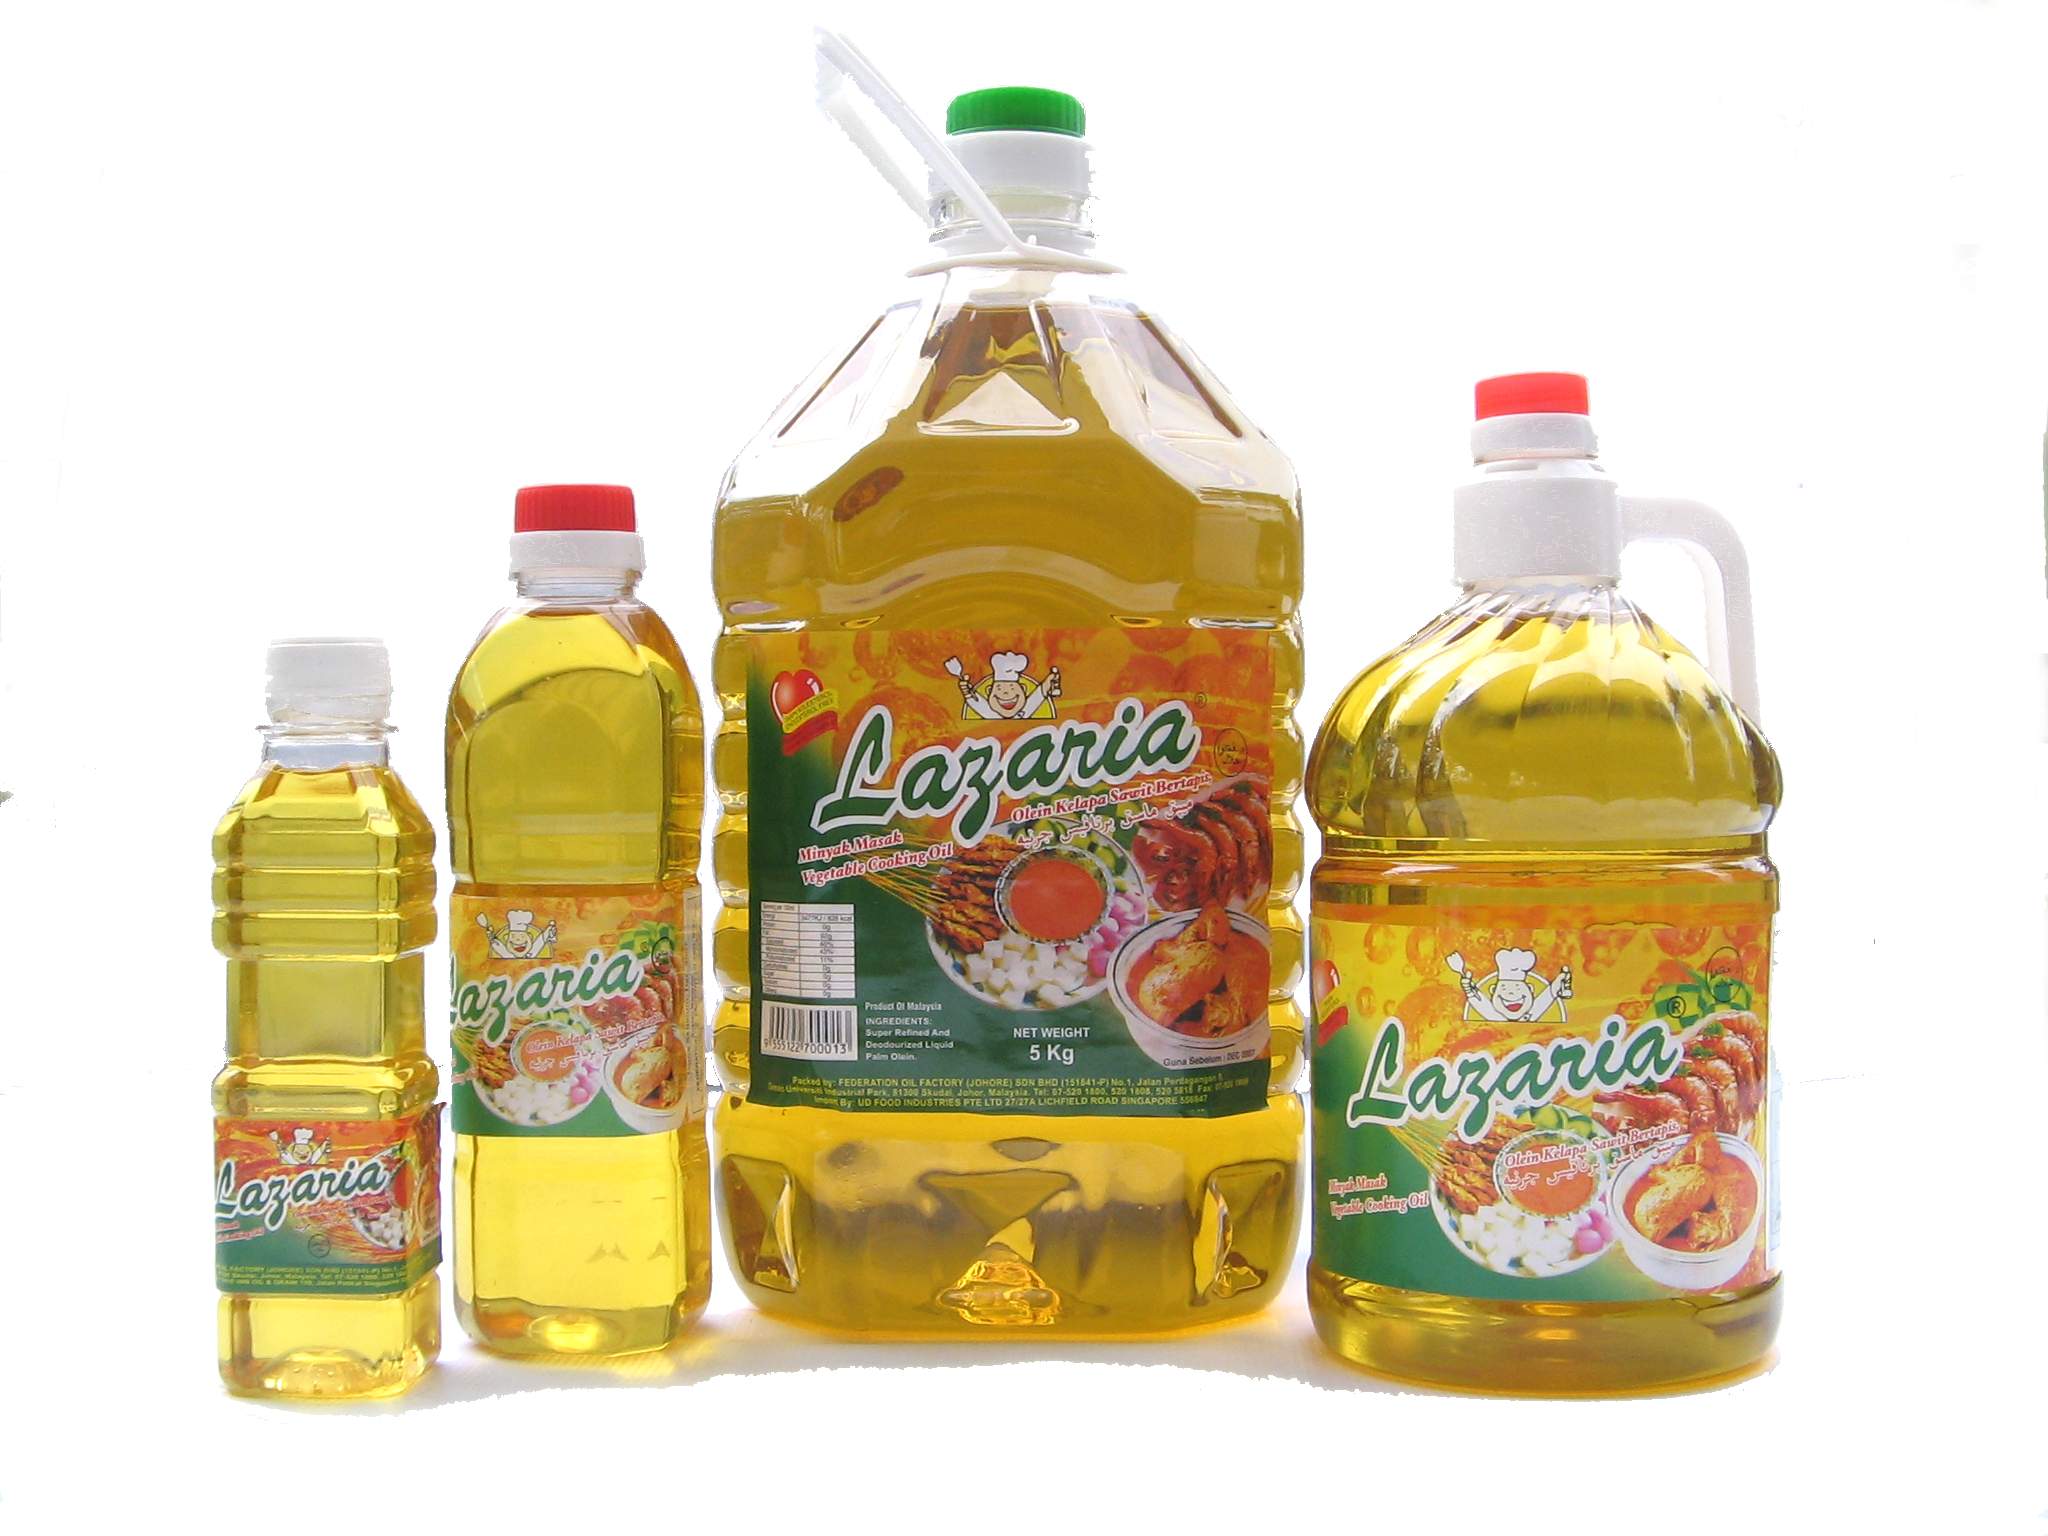 Selling Canola Cooking Oil